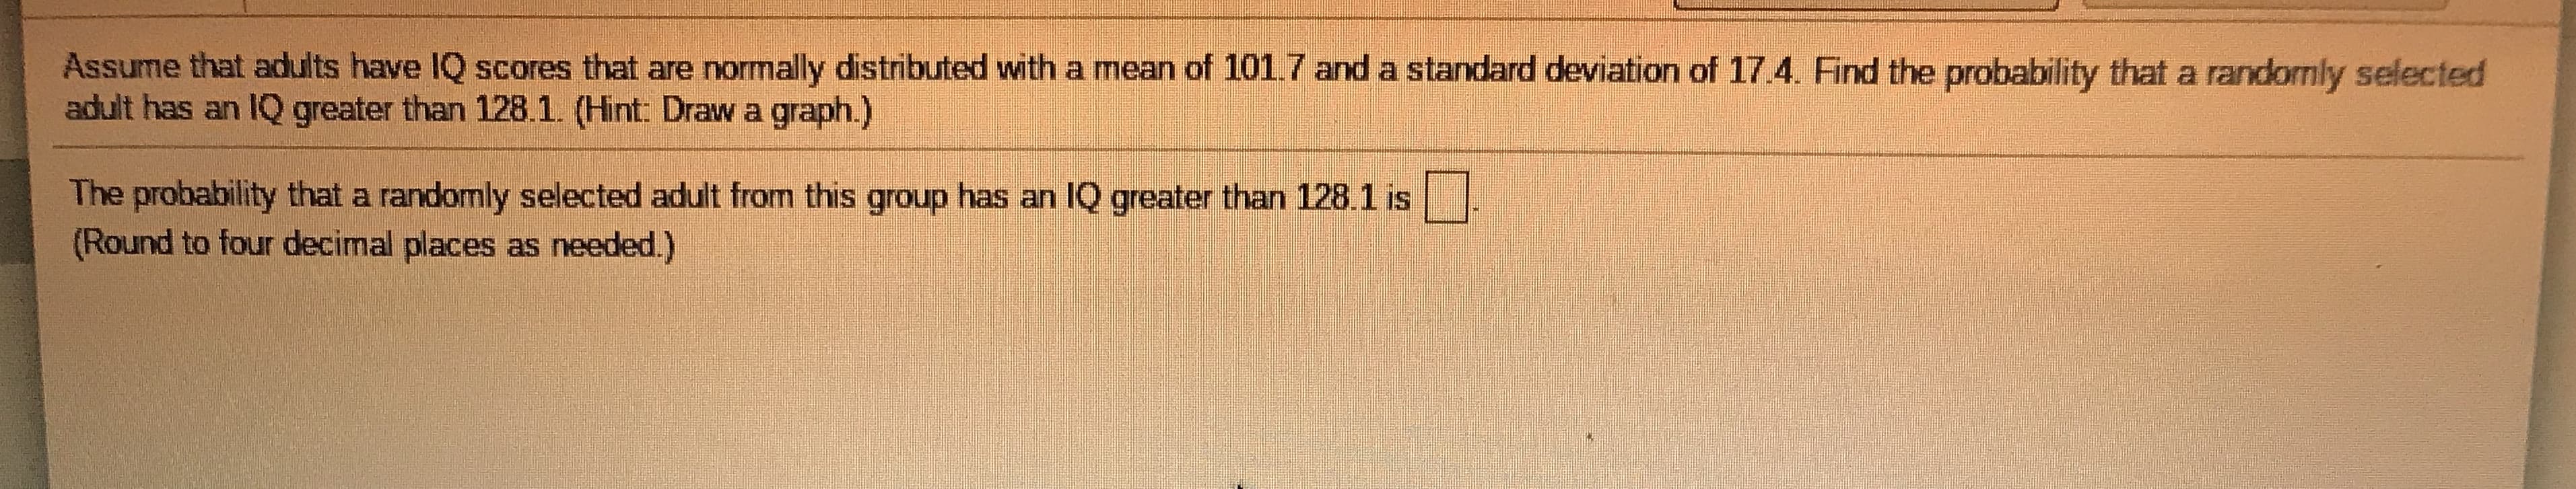 Assume that adults have IQ scores that are normally distributed with a mean of 101.7 and a standard deviation of 17.4. Find the probability that a randomly selected
adult has an IQ greater than 128.1. (Hint: Draw a graph.)
The probability that a randomly selected adult from this group has an IQ greater than 128.1 is
(Round to four decimal places as needed.)
